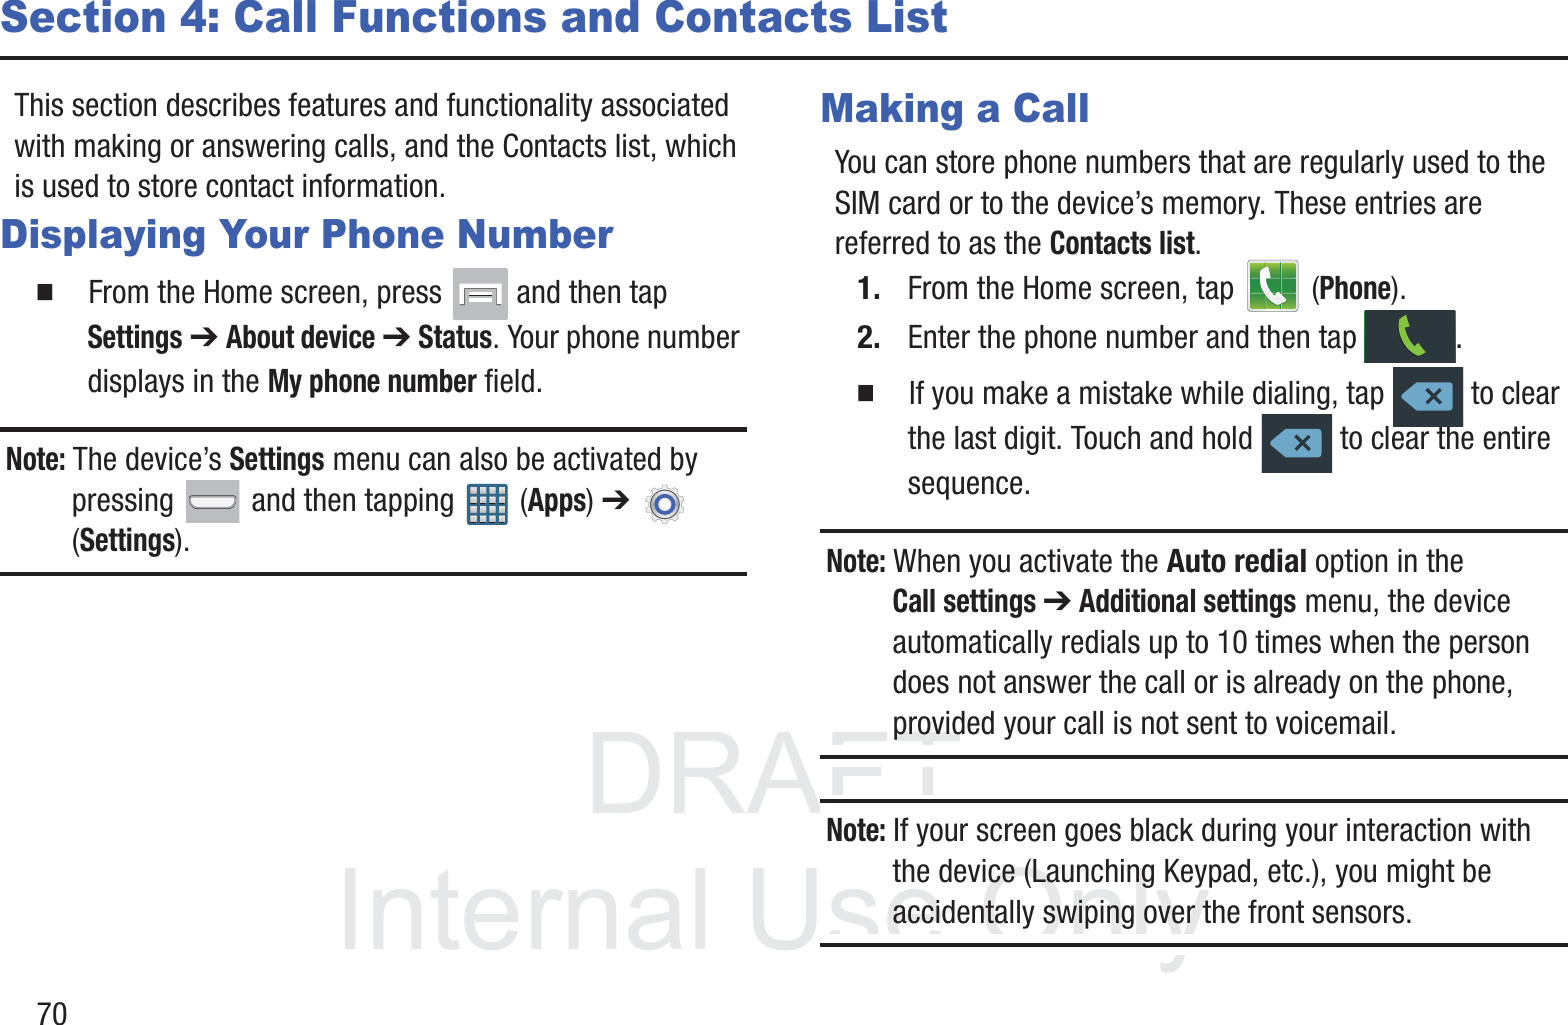 DRAFT InternalUse Only70Section 4: Call Functions and Contacts ListThis section describes features and functionality associated with making or answering calls, and the Contacts list, which is used to store contact information.Displaying Your Phone Number䡲  From the Home screen, press   and then tap Settings ➔ About device ➔ Status. Your phone number displays in the My phone number field. Note: The device’s Settings menu can also be activated by pressing   and then tapping   (Apps) ➔   (Settings).Making a CallYou can store phone numbers that are regularly used to the SIM card or to the device’s memory. These entries are referred to as the Contacts list.1. From the Home screen, tap   (Phone).2. Enter the phone number and then tap  .䡲  If you make a mistake while dialing, tap   to clear the last digit. Touch and hold   to clear the entire sequence.Note: When you activate the Auto redial option in the Call settings ➔ Additional settings menu, the device automatically redials up to 10 times when the person does not answer the call or is already on the phone, provided your call is not sent to voicemail.Note: If your screen goes black during your interaction with the device (Launching Keypad, etc.), you might be accidentally swiping over the front sensors.